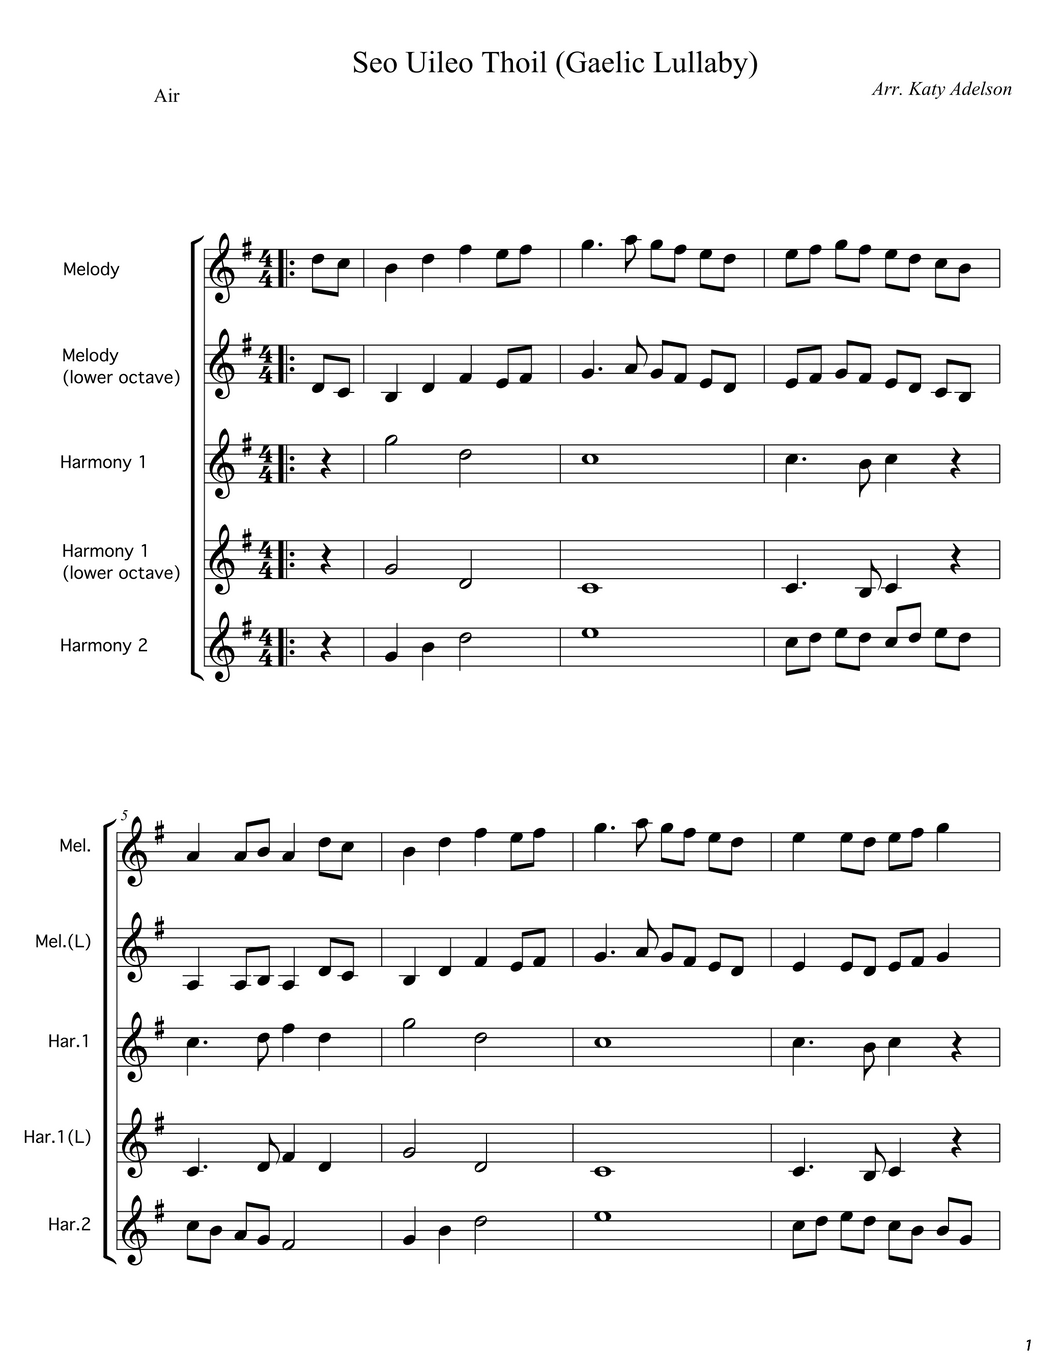 Seo Uileo Thoil (Gaelic Lullaby) - Duet, Trio, Quartet, Quintet (5 Parts) - Violin Sheet Music - Arranged by Katy Adelson